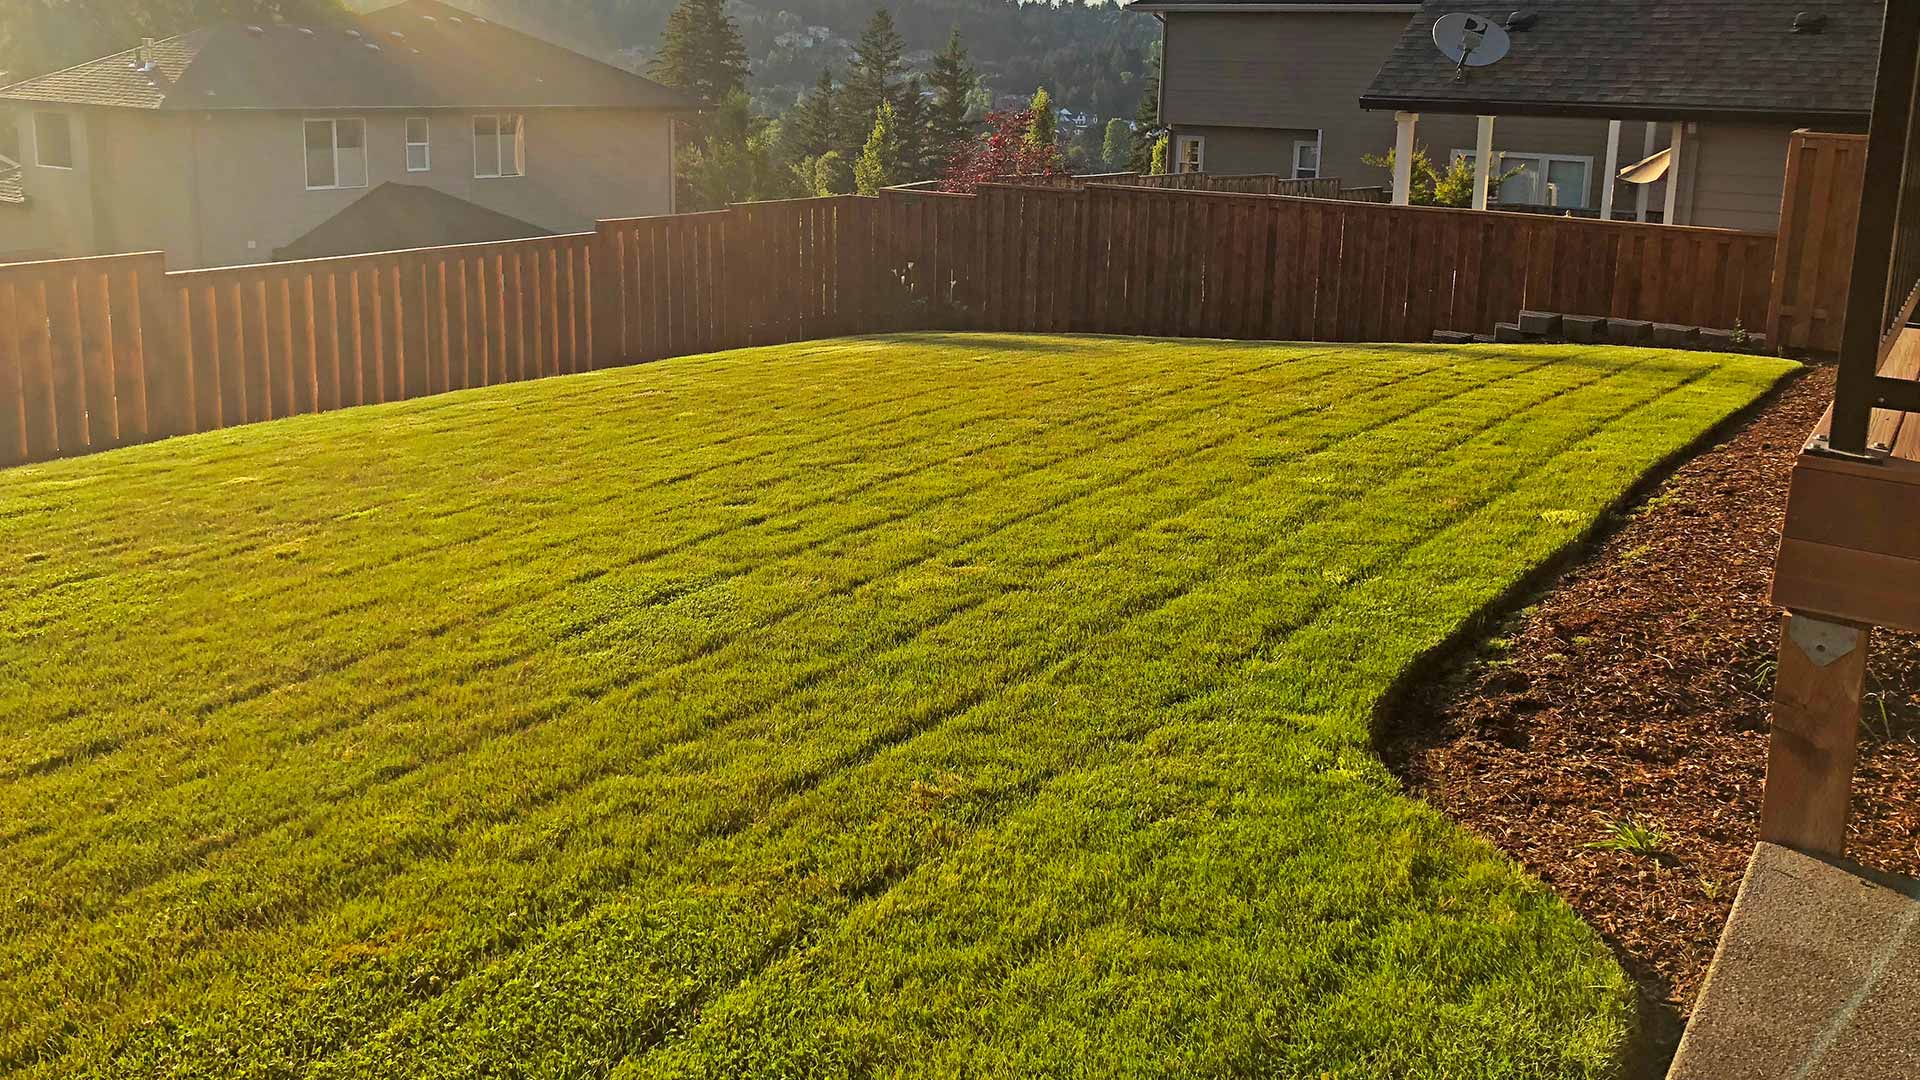 Lake Oswego, OR home back yard with fresh mowing lines.